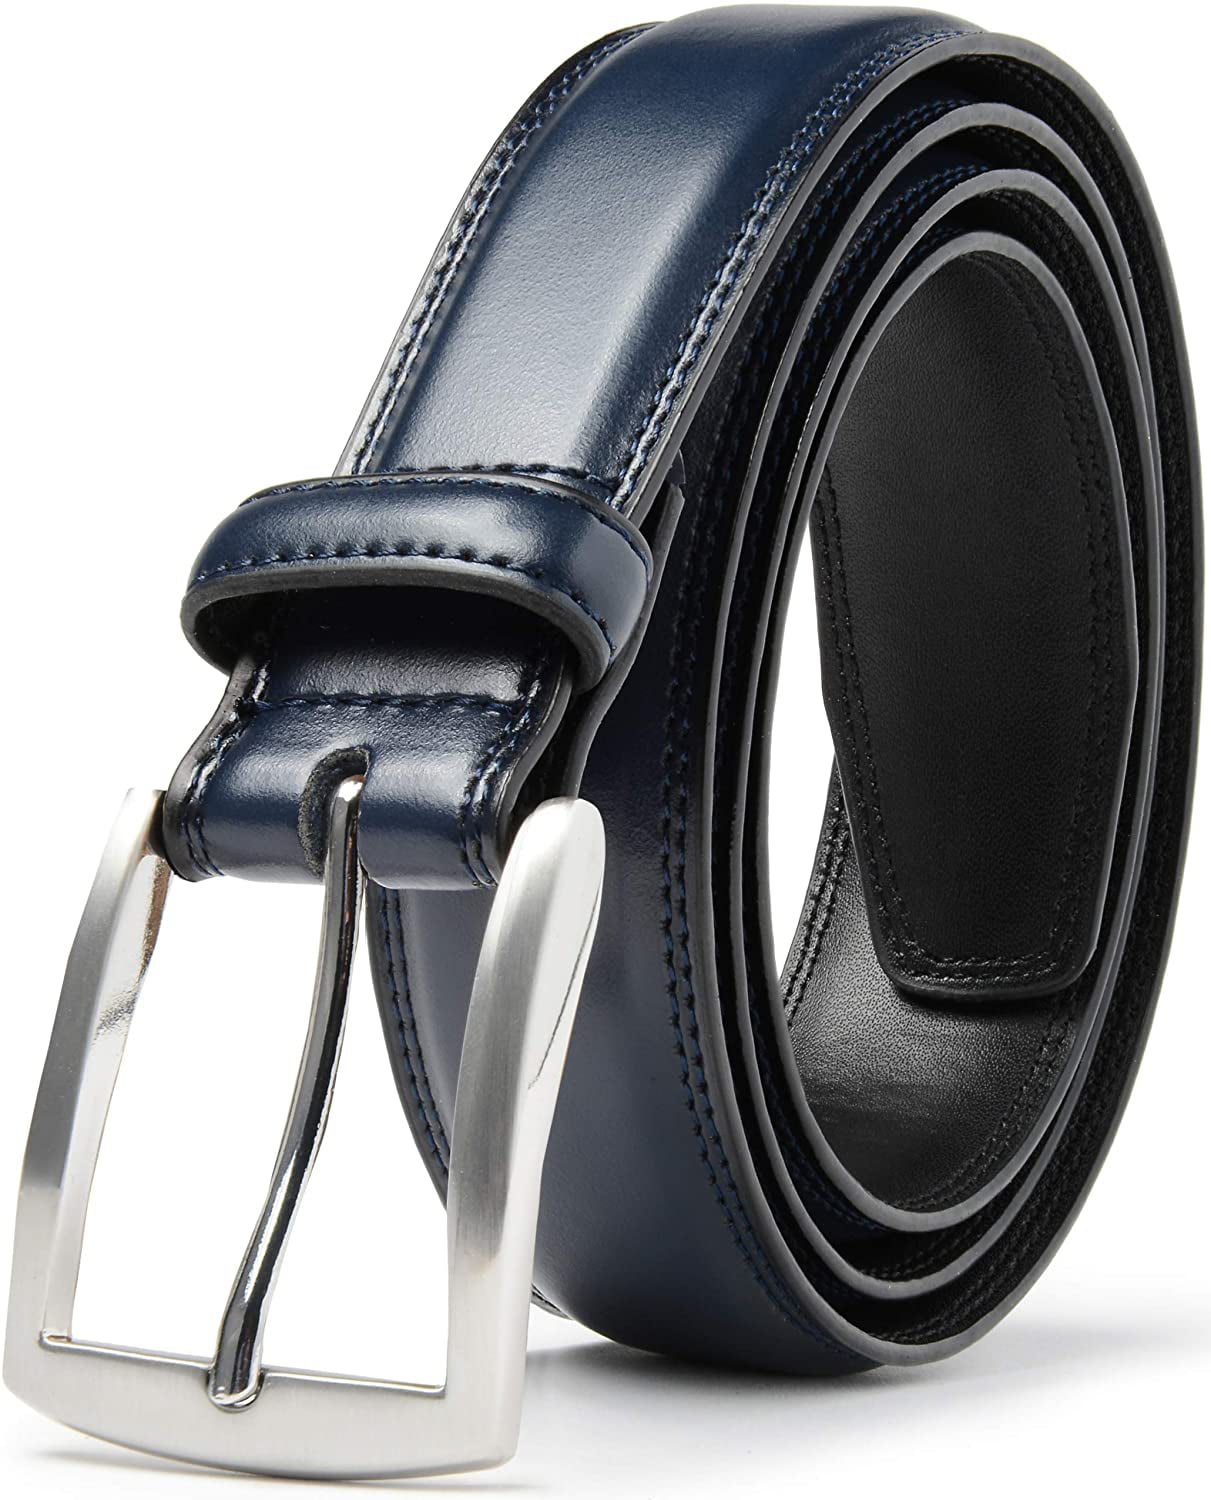 Fashion & Classic Designs for Work Business and Casual Mens Genuine Leather Dress Belt 100% Cow Leather Handmade